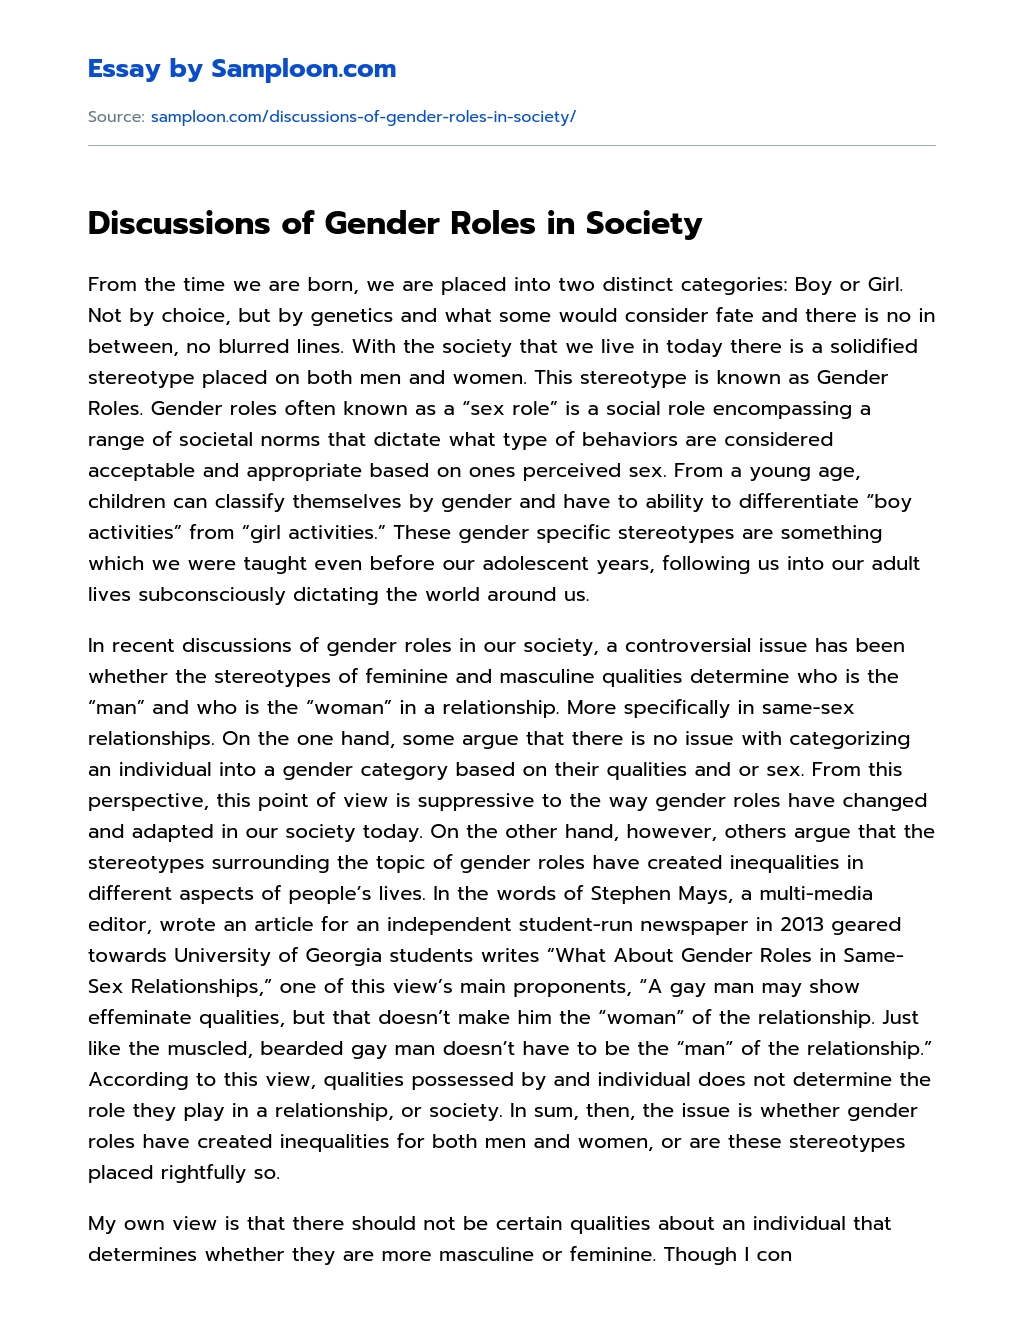 Discussions of Gender Roles in Society essay